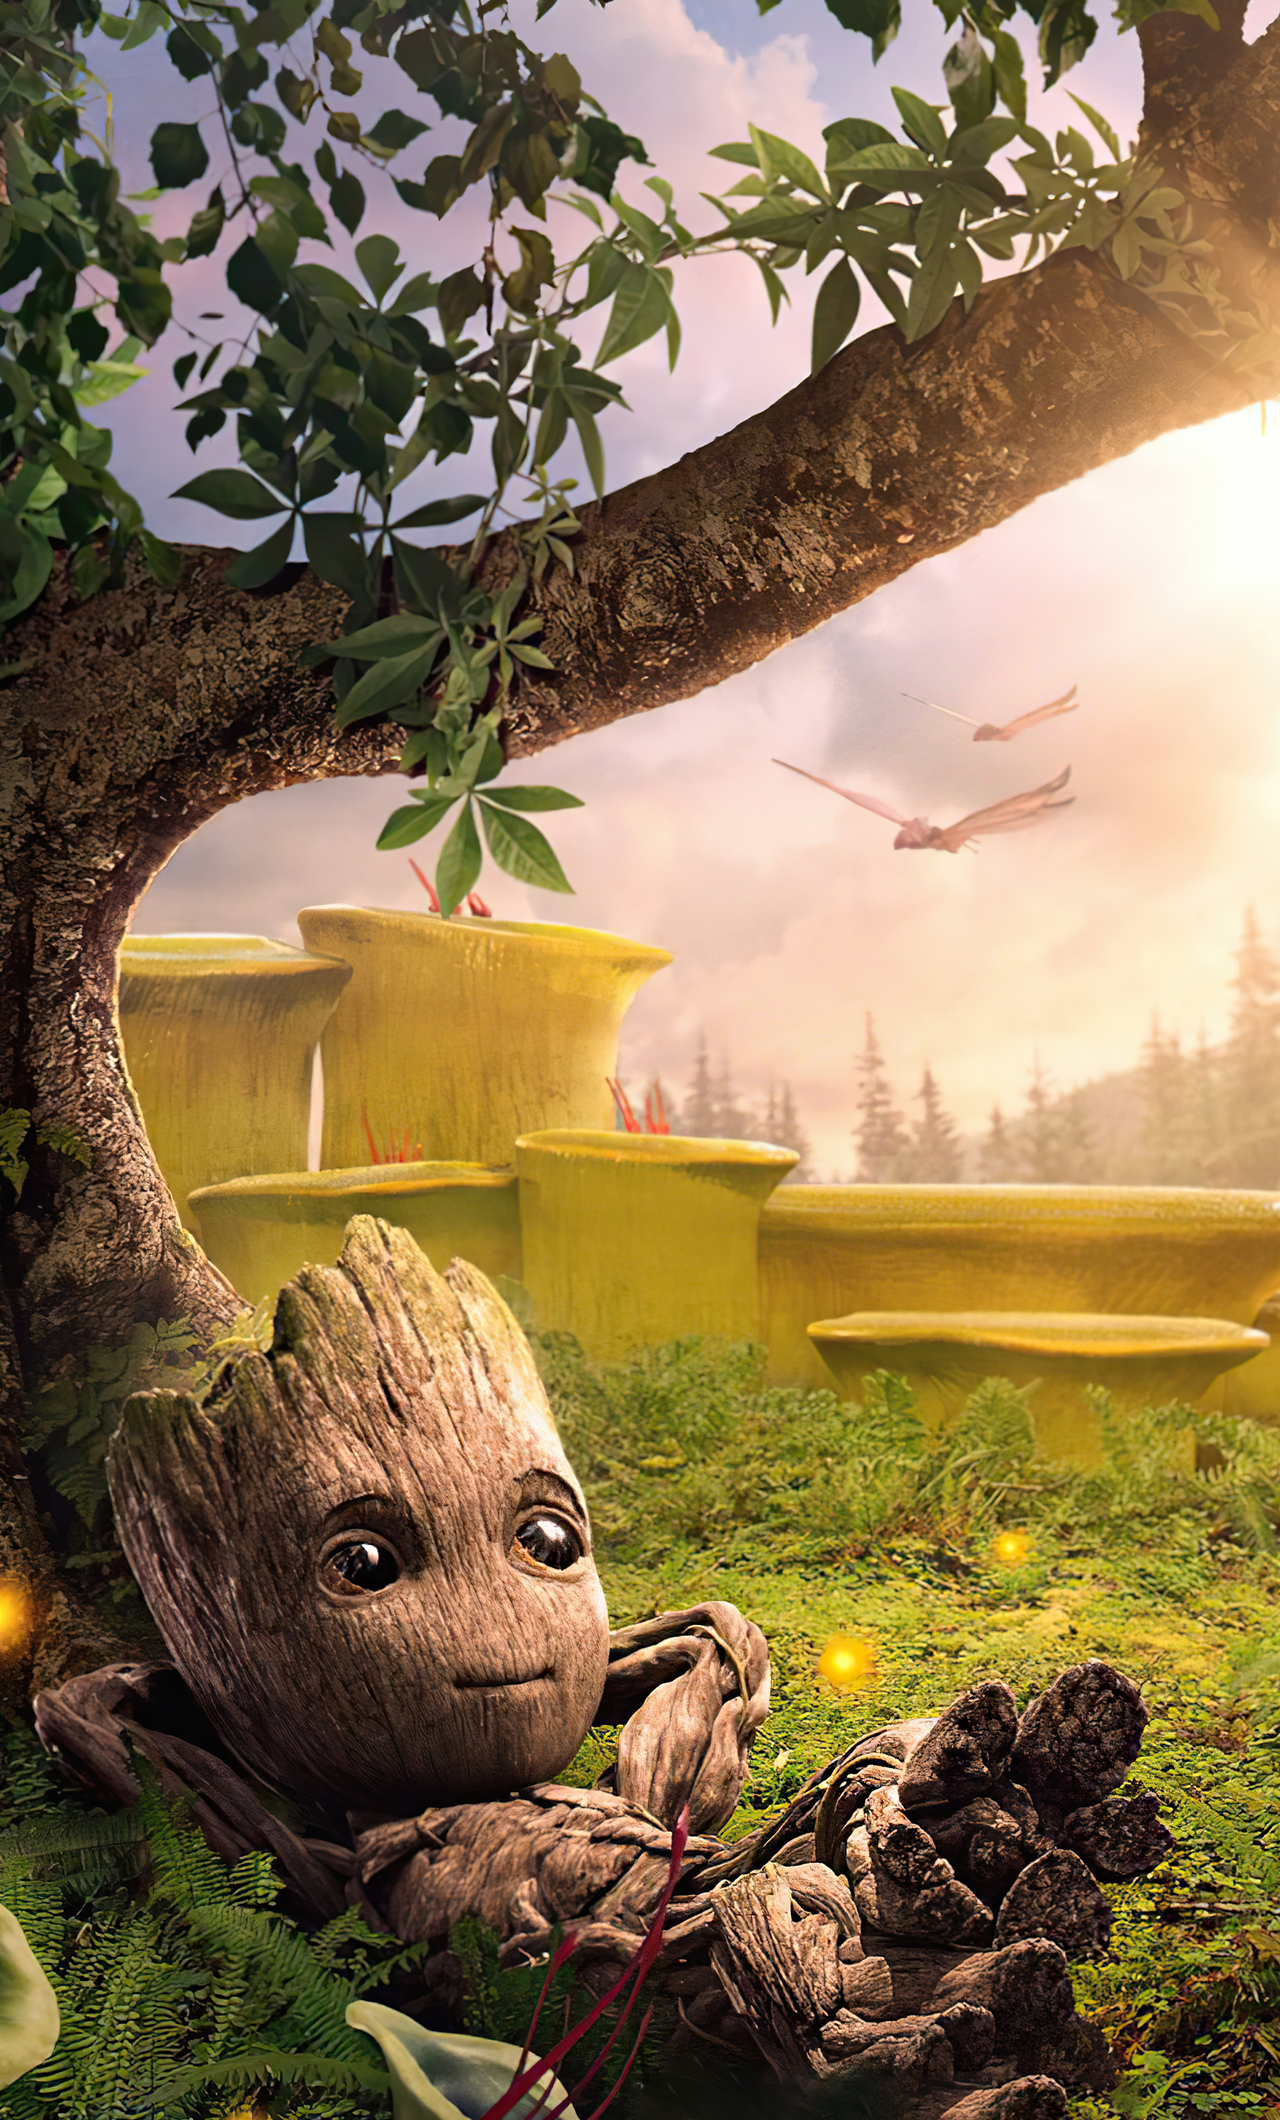 SDCC 2022 Prepare for Adorable Overload With I AM GROOT Trailer